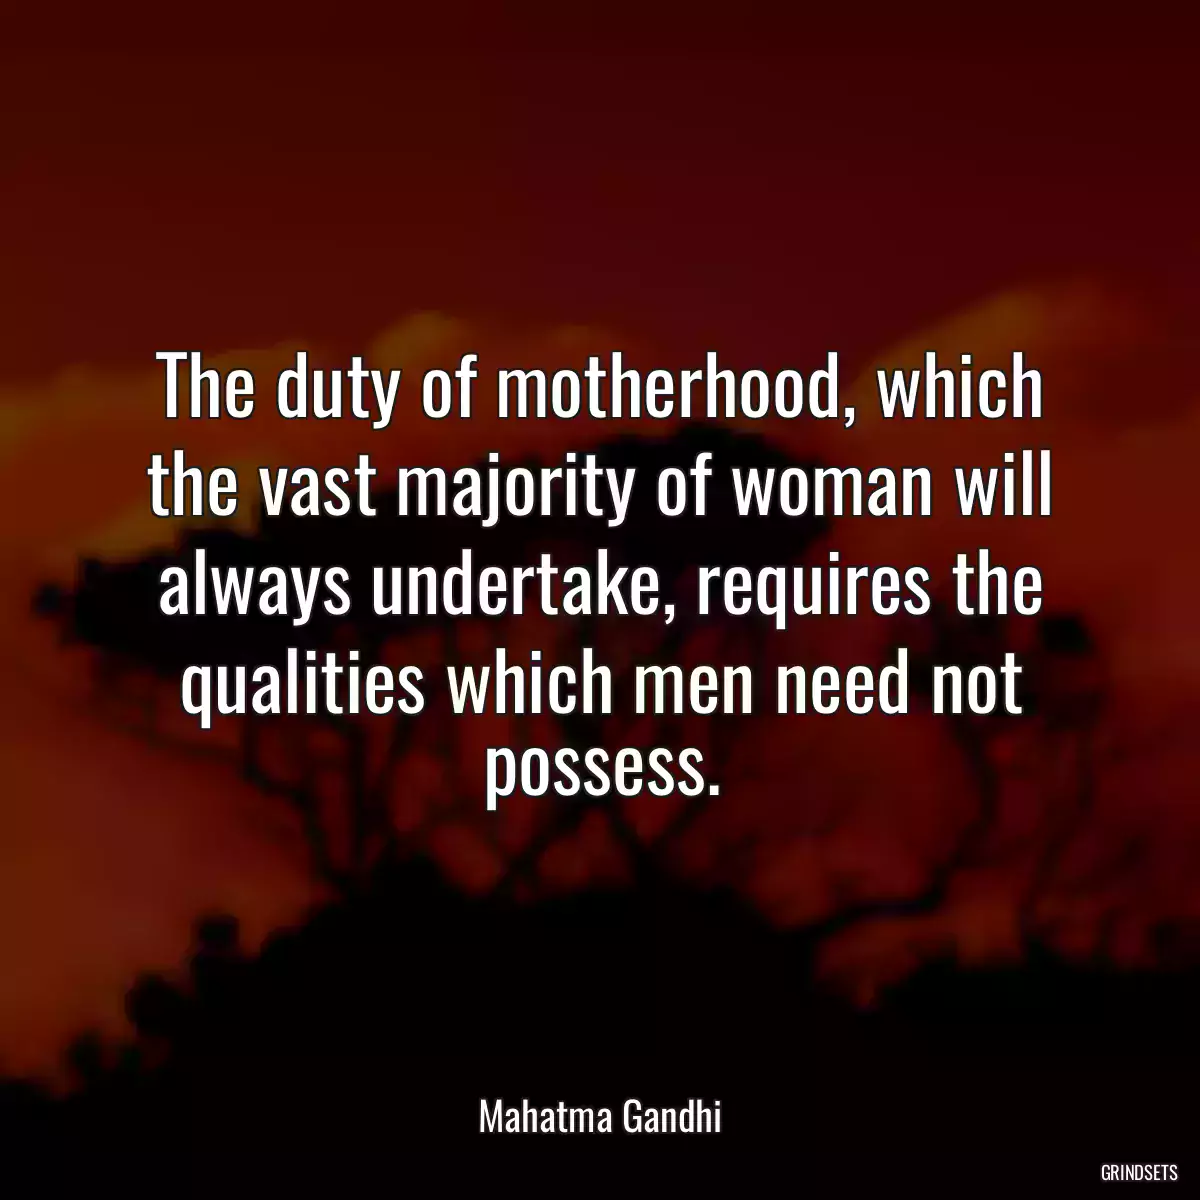 The duty of motherhood, which the vast majority of woman will always undertake, requires the qualities which men need not possess.